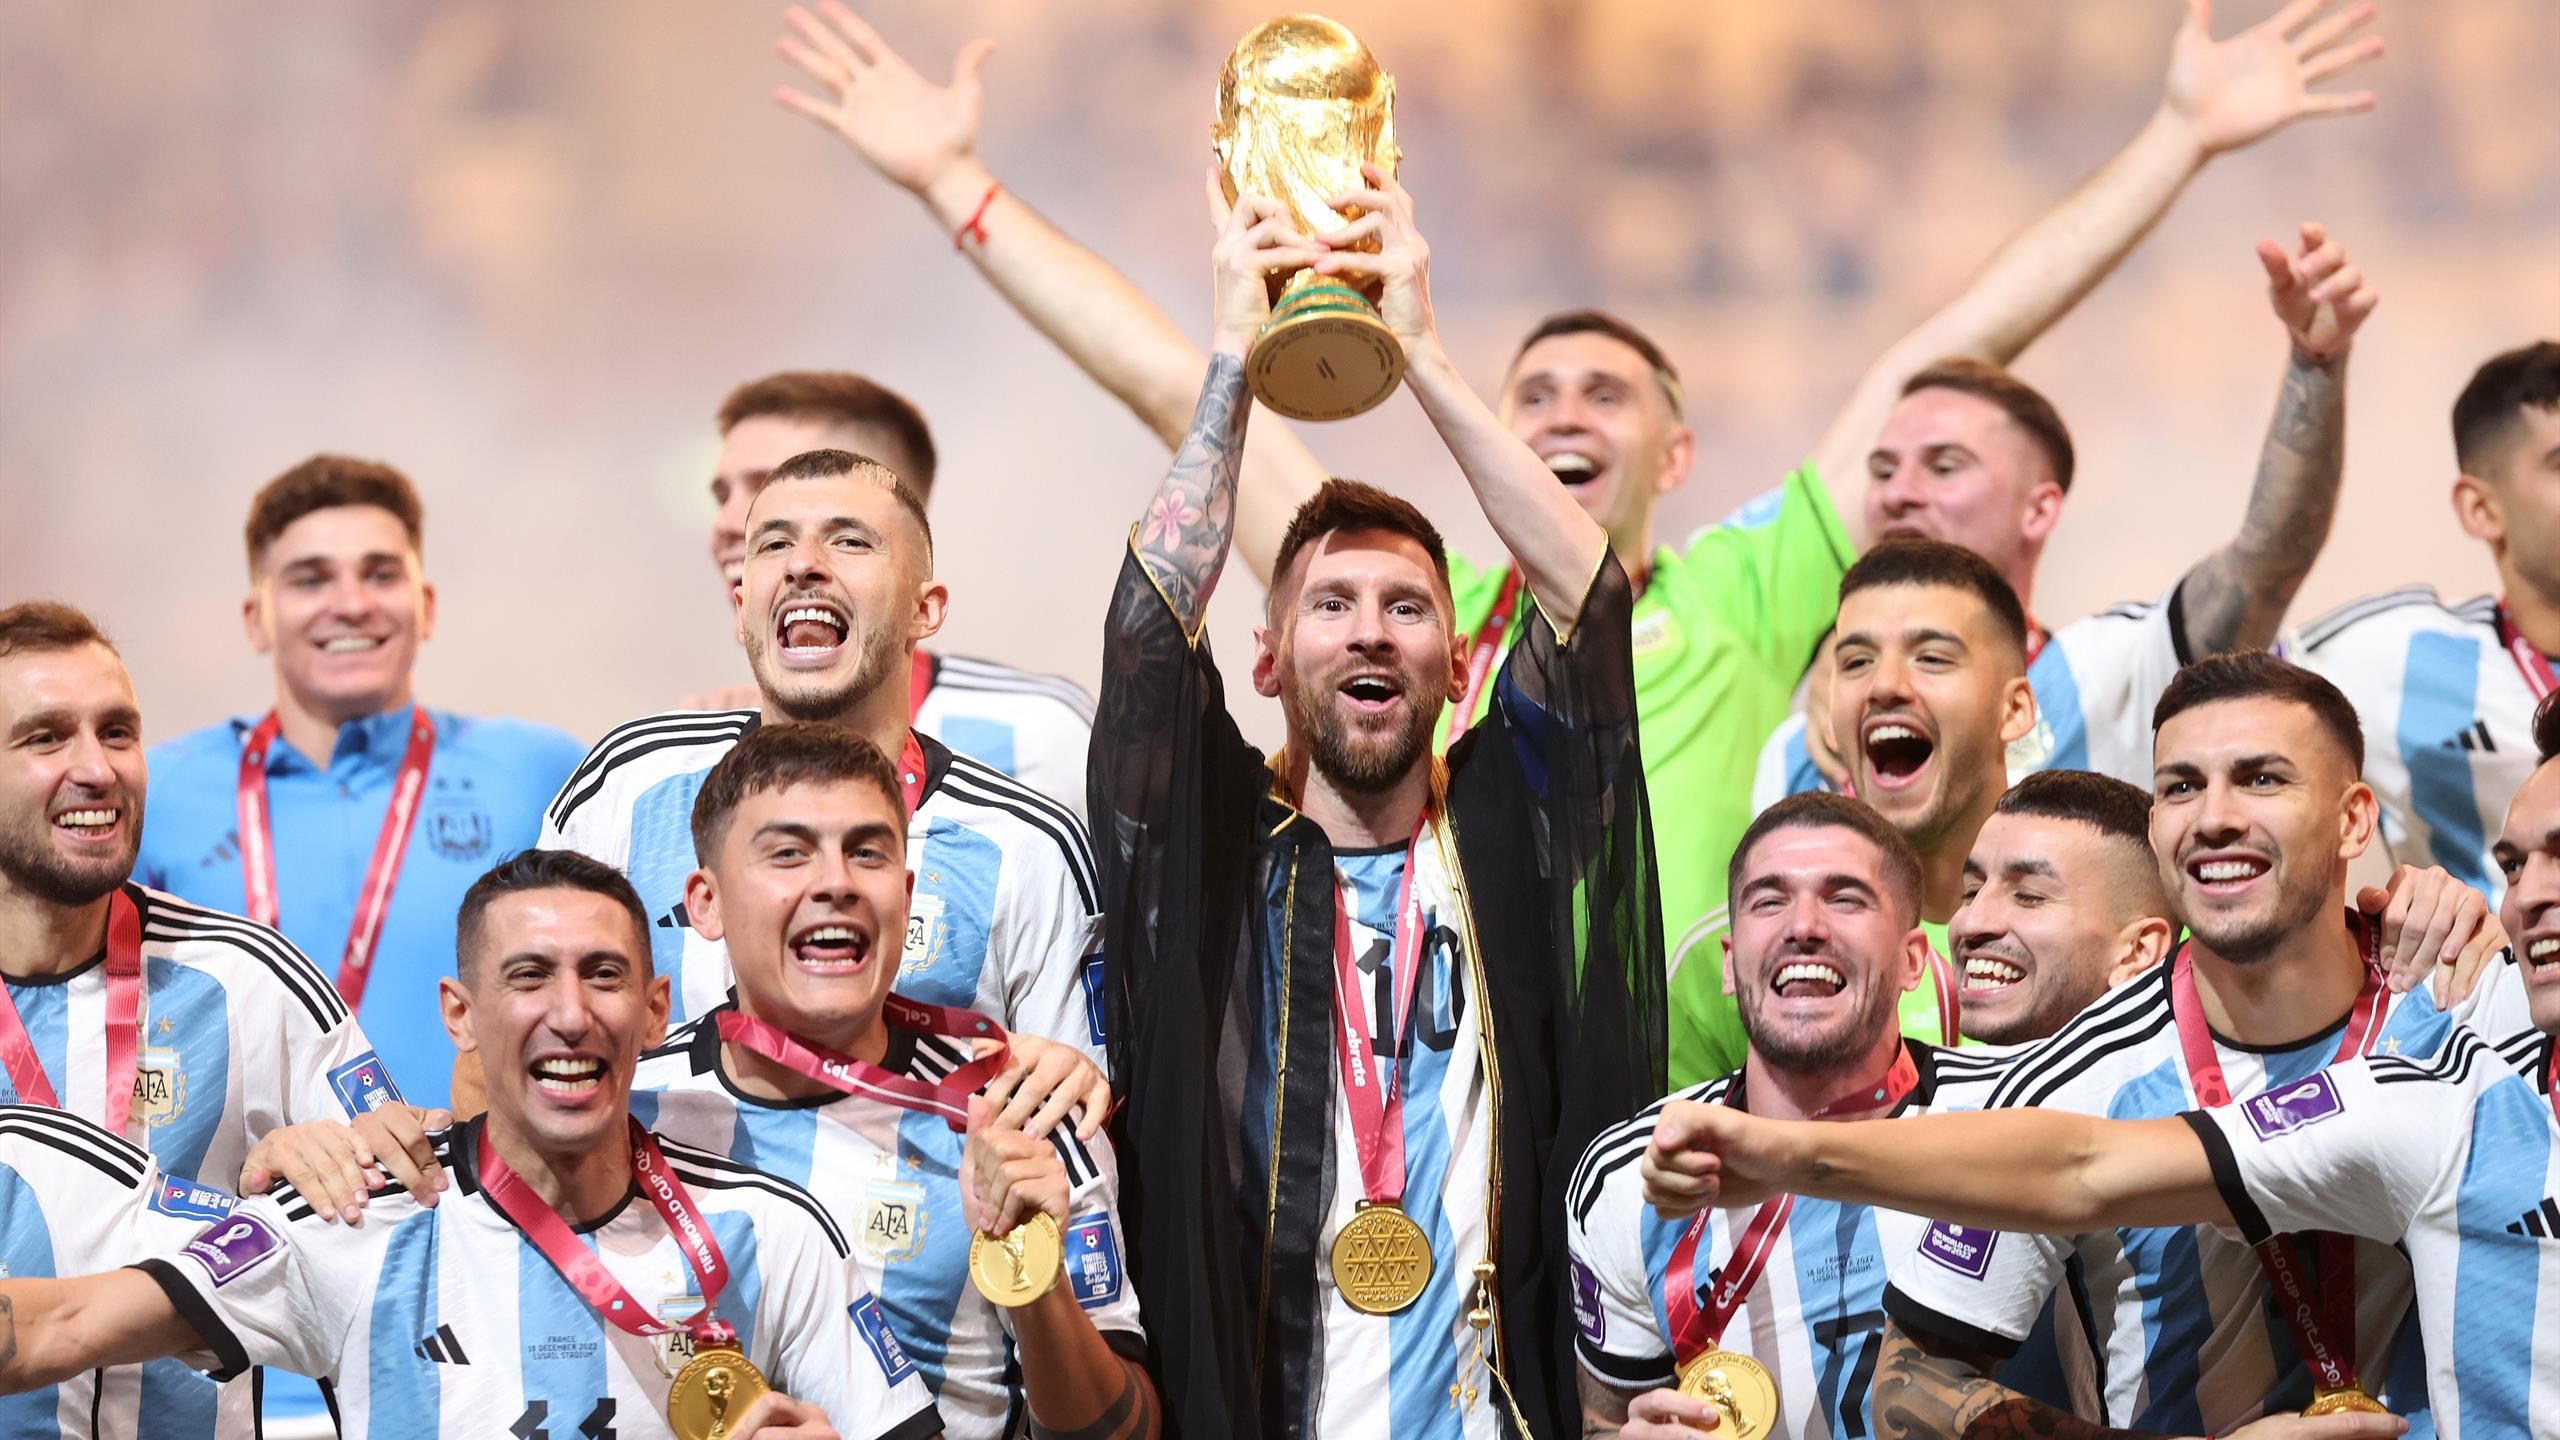 Lionel Messis World Cup Trophy Photo Is MostLiked Post on Instagram